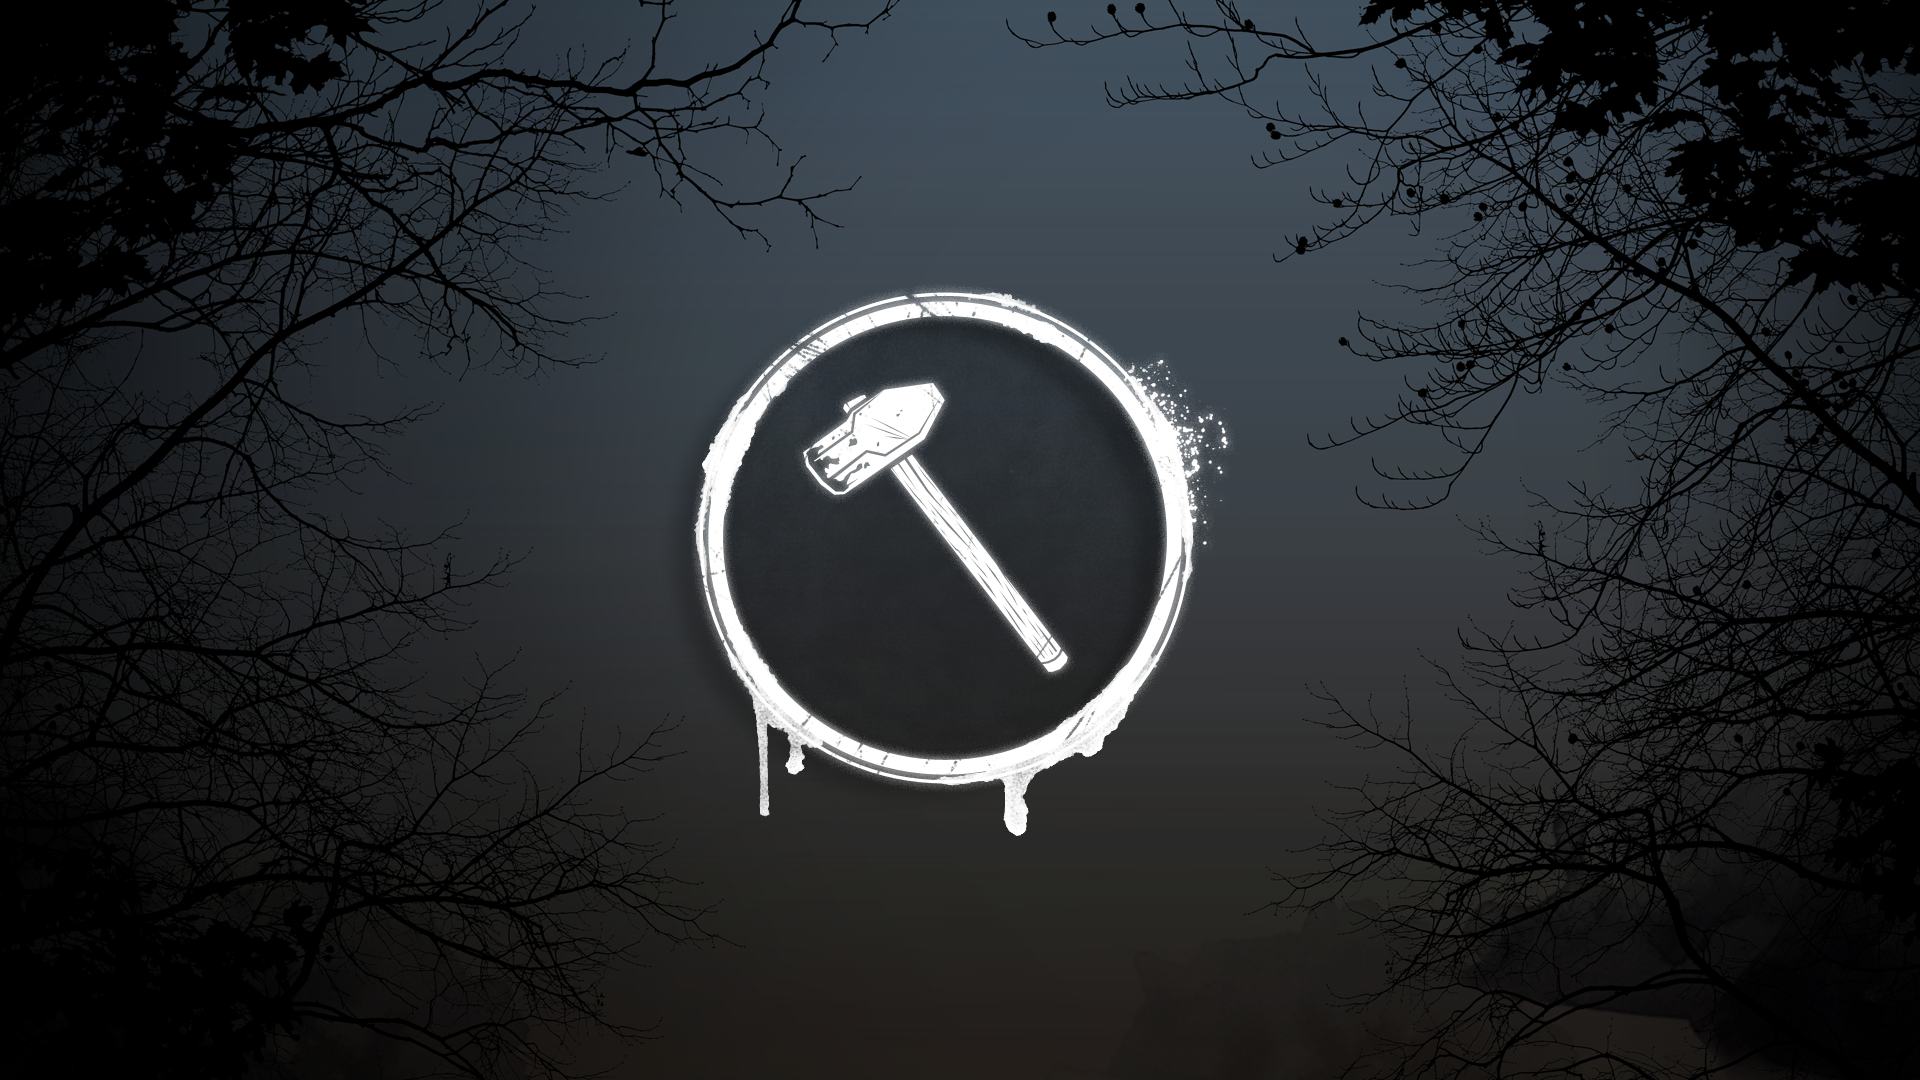 Icon for Adept Cannibal